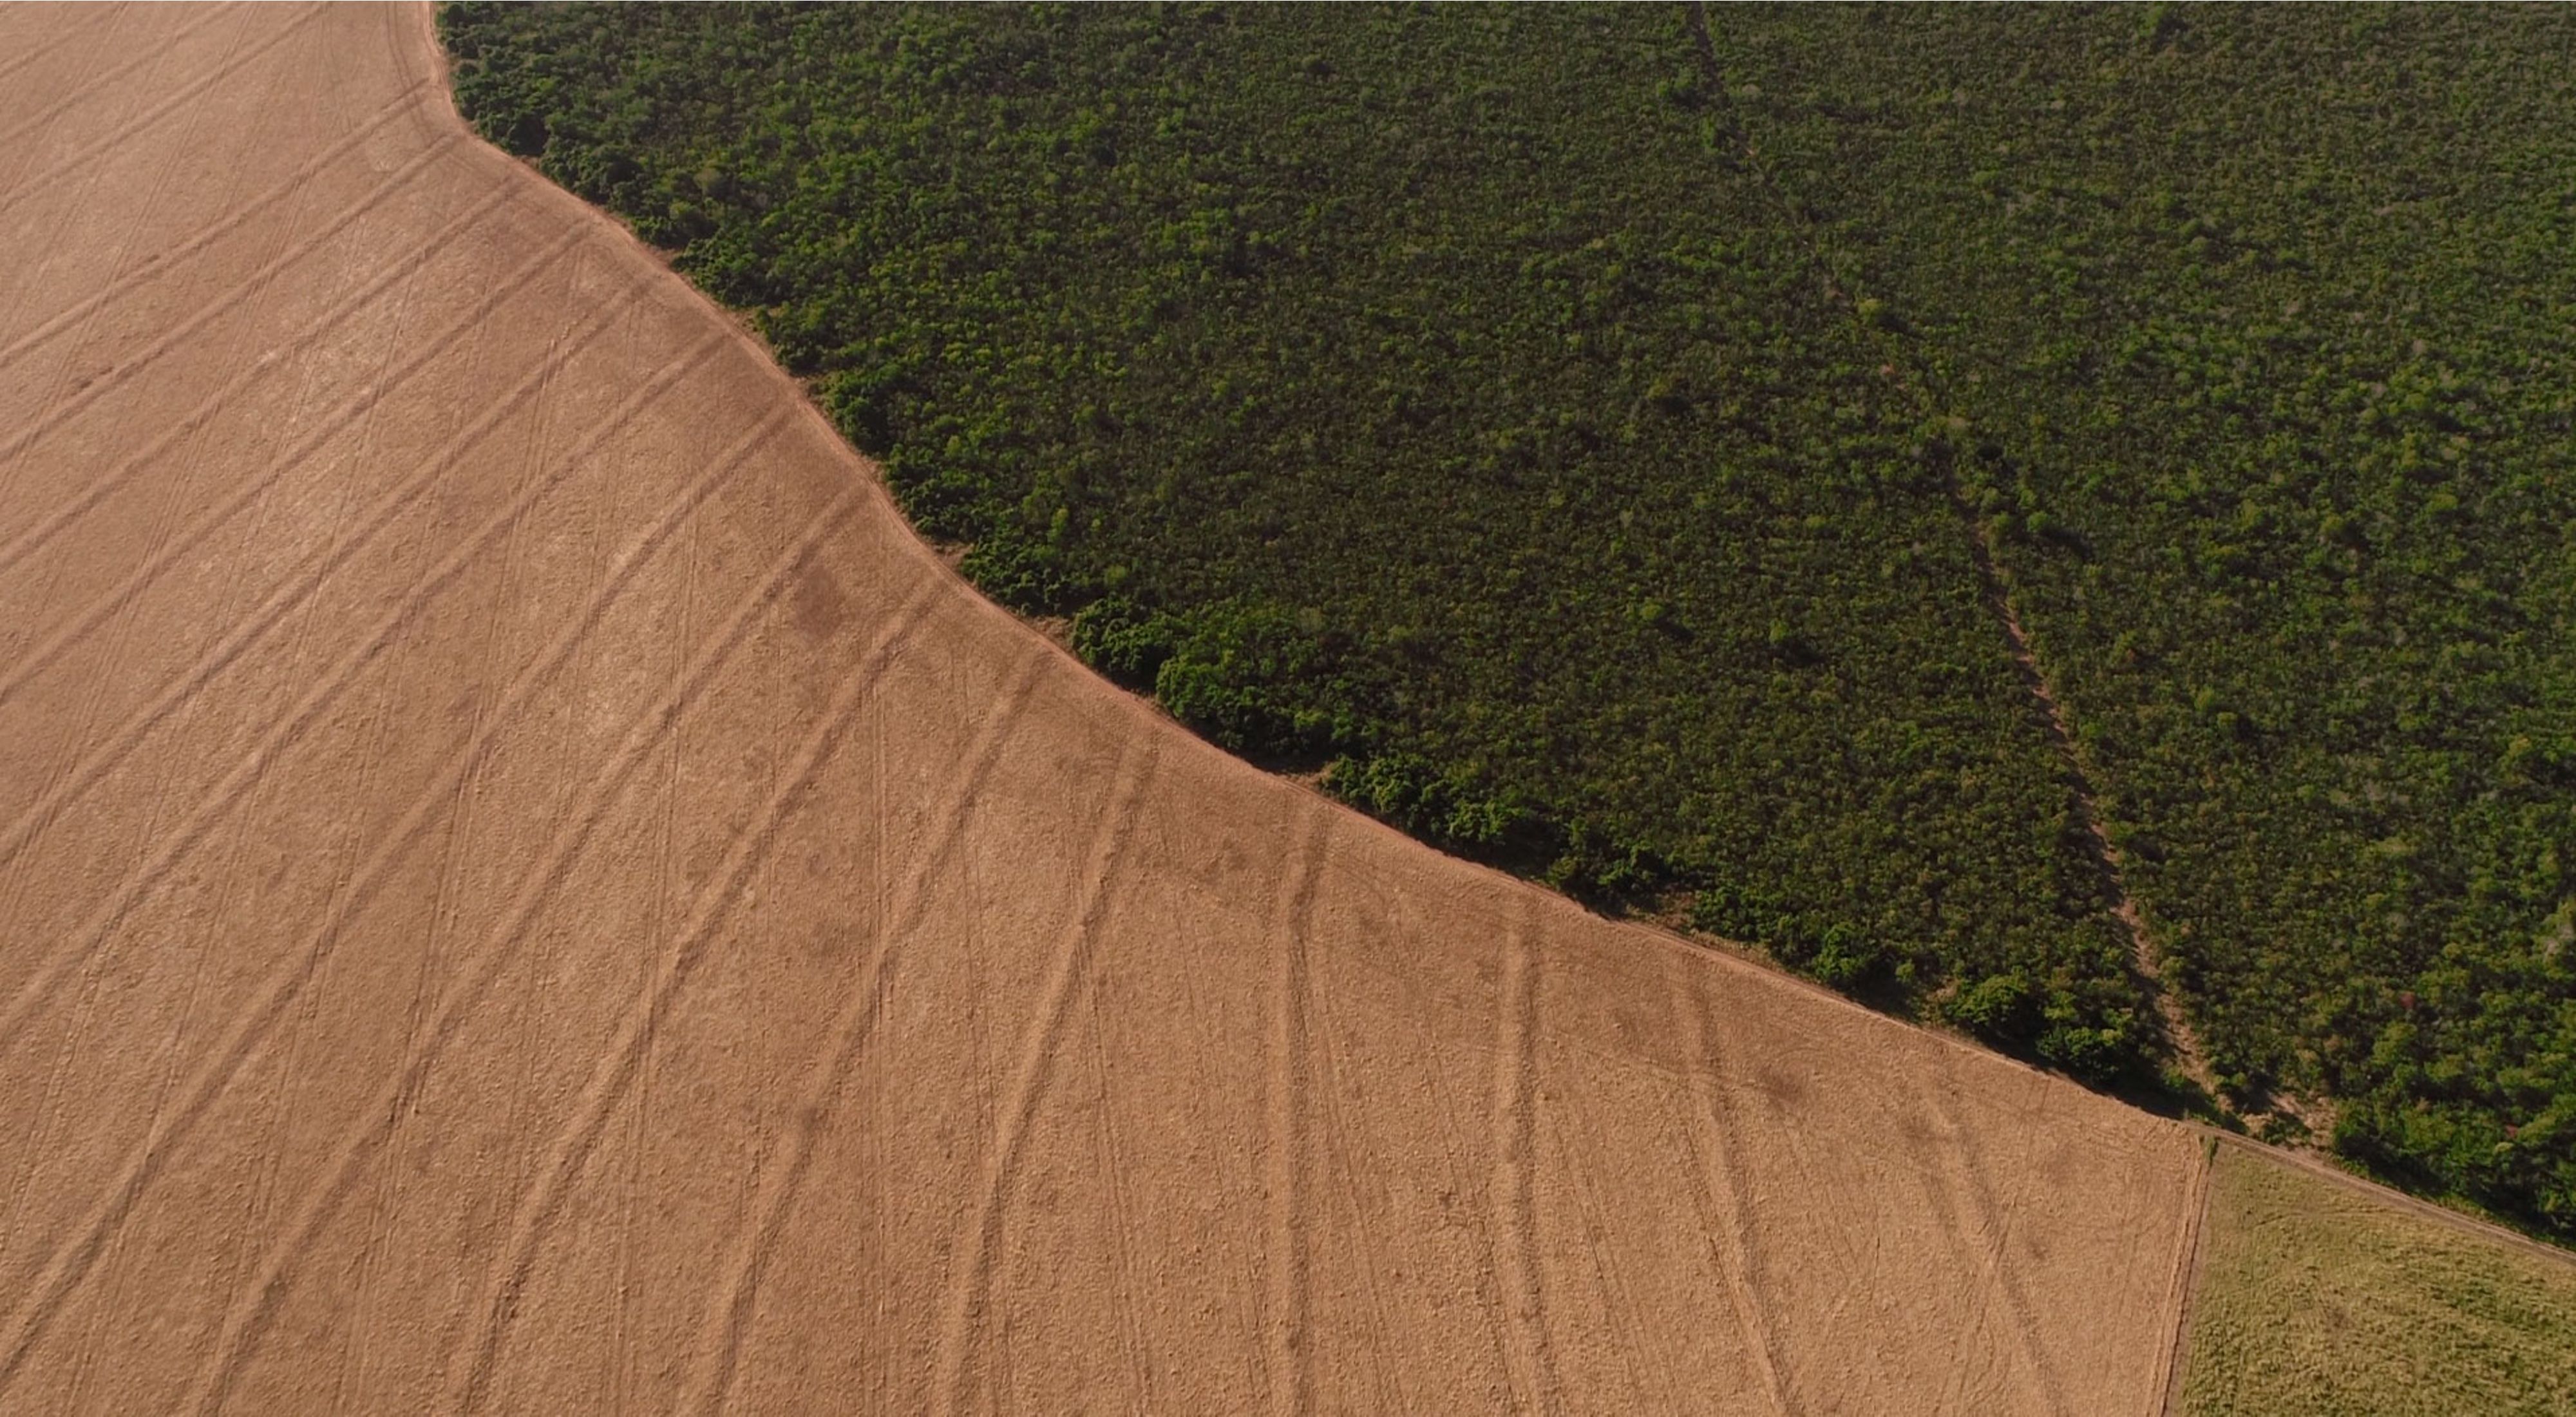 Aerial view of soy fields bordering forest in Itaituba, Pará, Brazil.